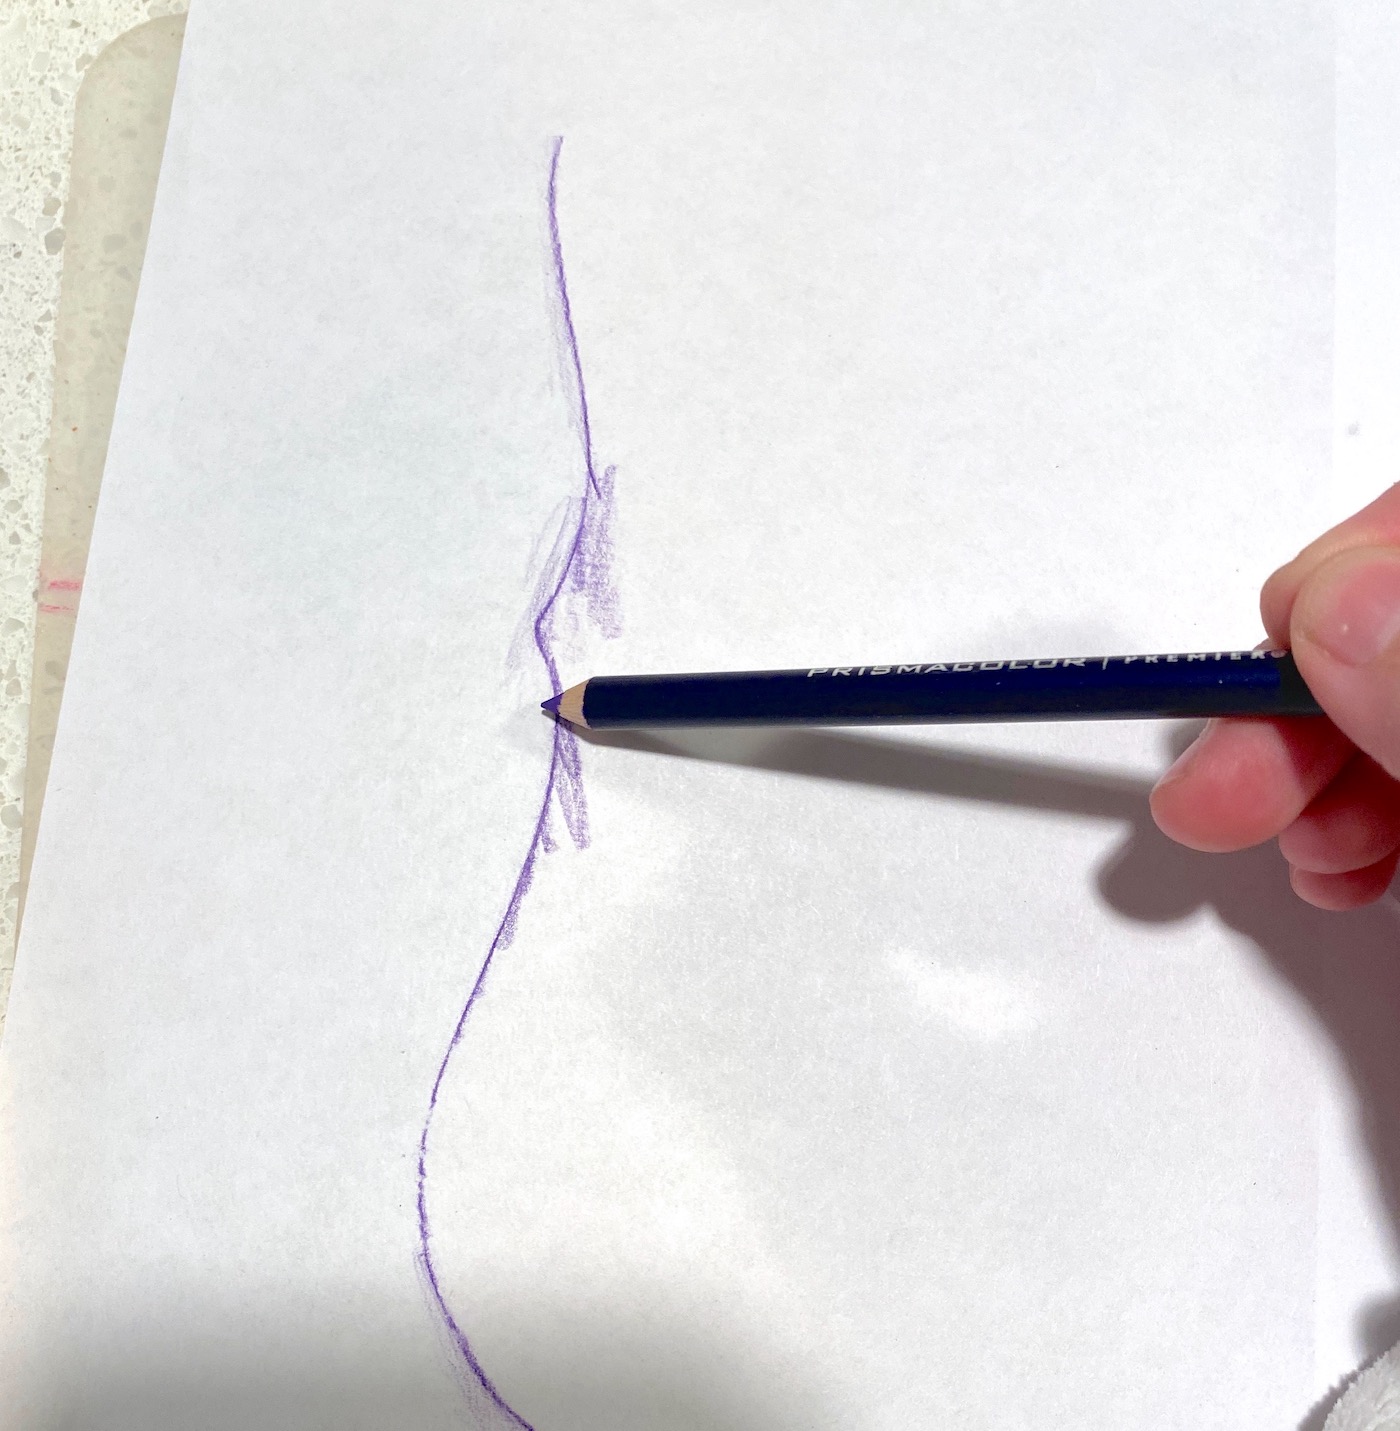 Tracing the plaque with the edge of a pencil